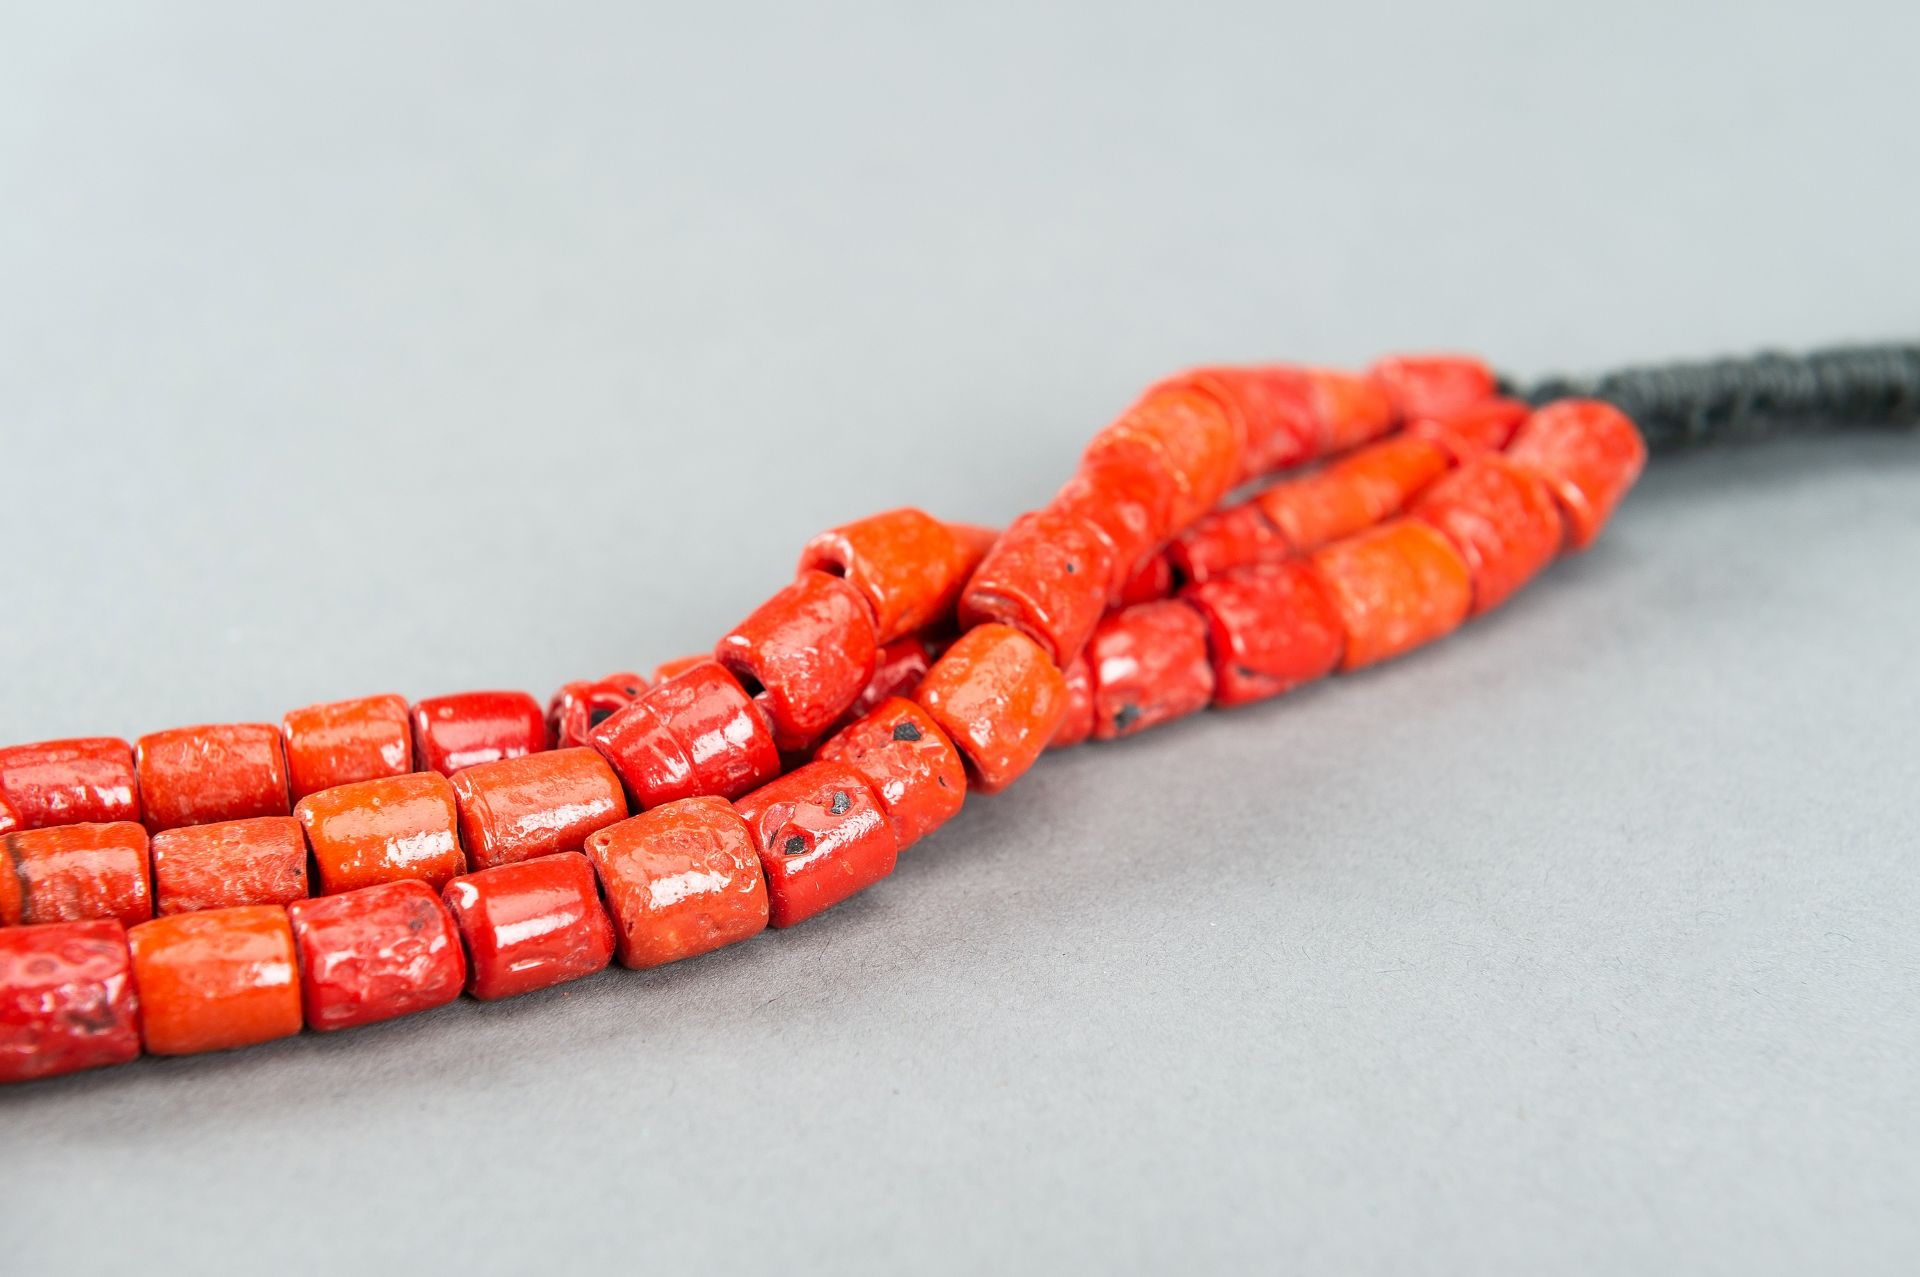 A NAGALAND 'CORAL' GLASS NECKLACE, c. 1900s - Image 5 of 9